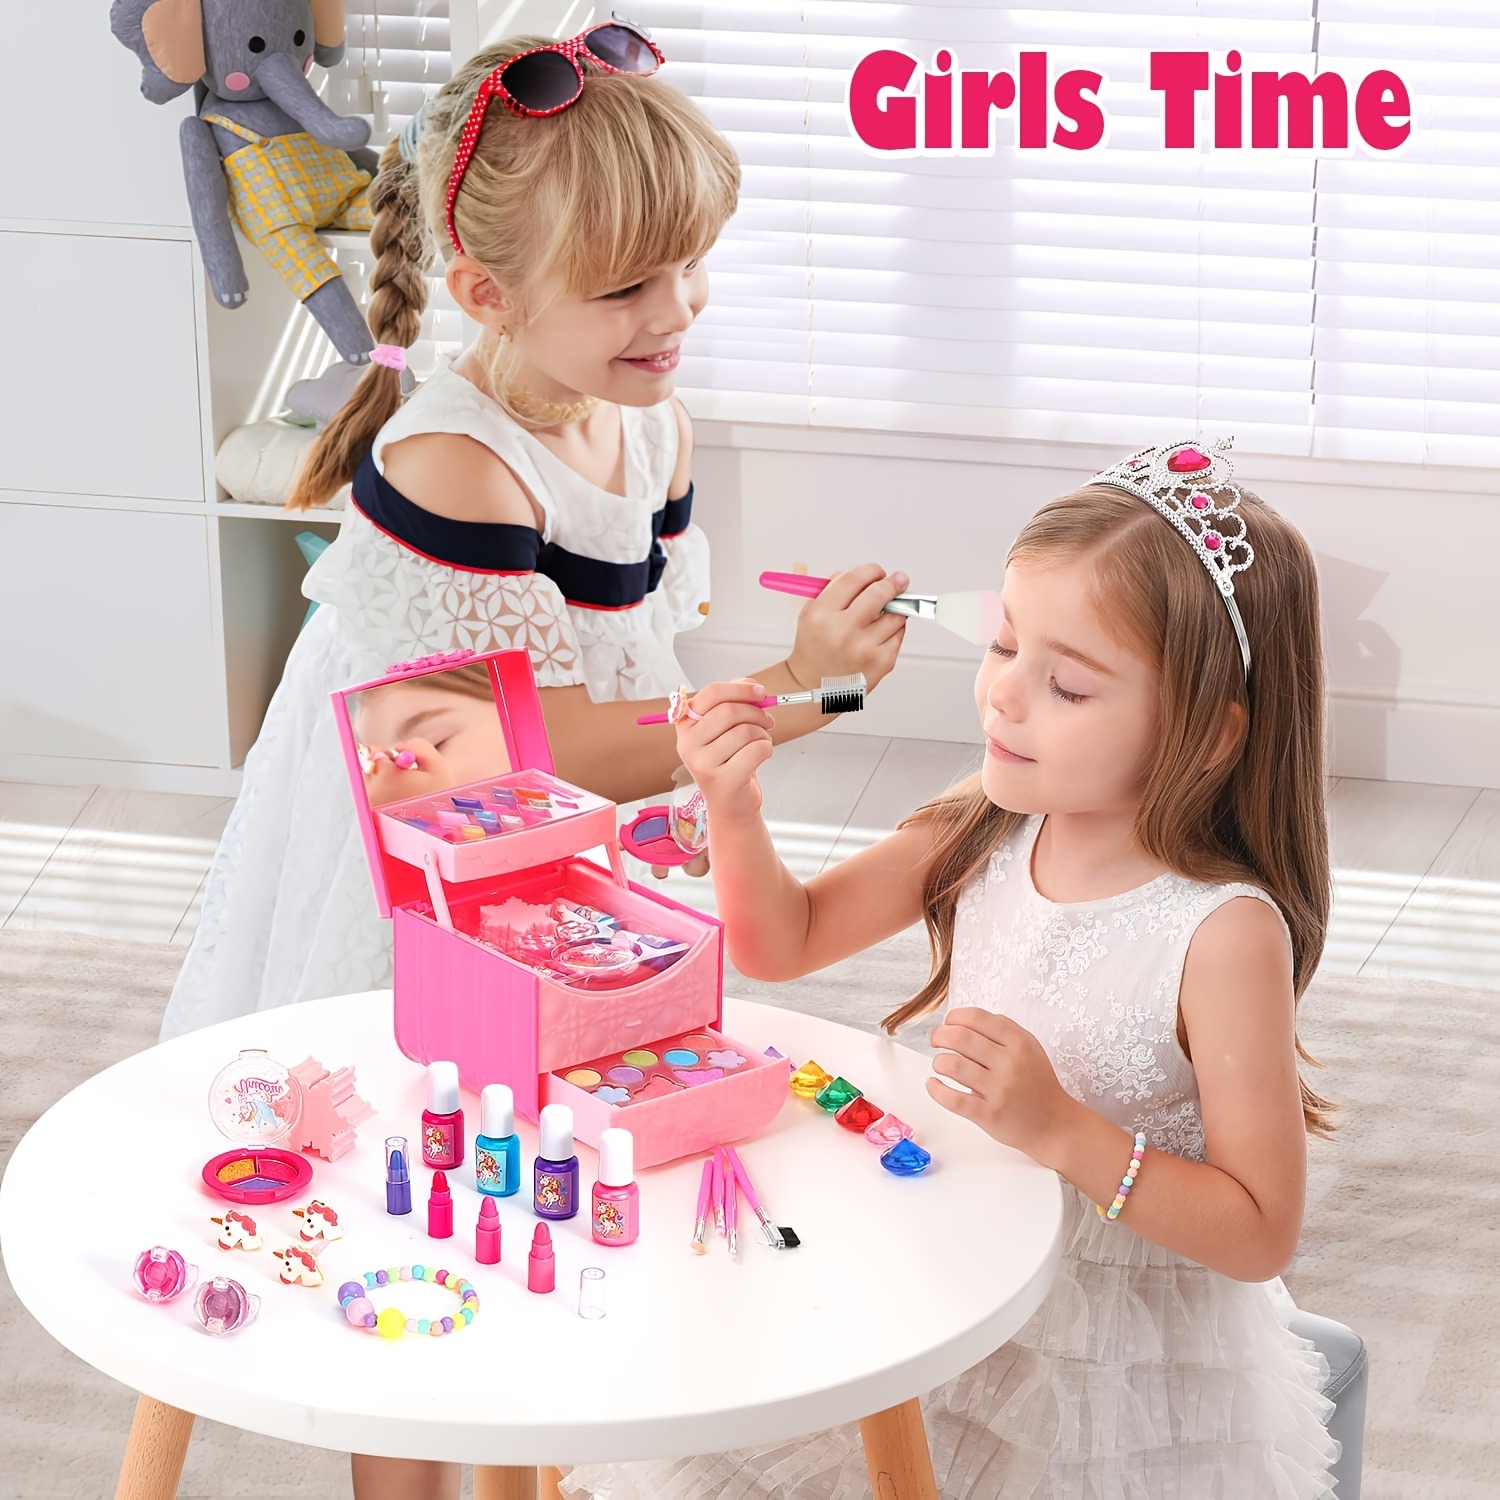  Kids Real Makeup Kit for Little Girls with Unicorn Bag - Real,  Non Toxic, Washable Make Up Toy - Unicorn Toys Gift for 3 4 5 6 7 8 9 10 12  Years Old Girls Birthday : Beauty & Personal Care